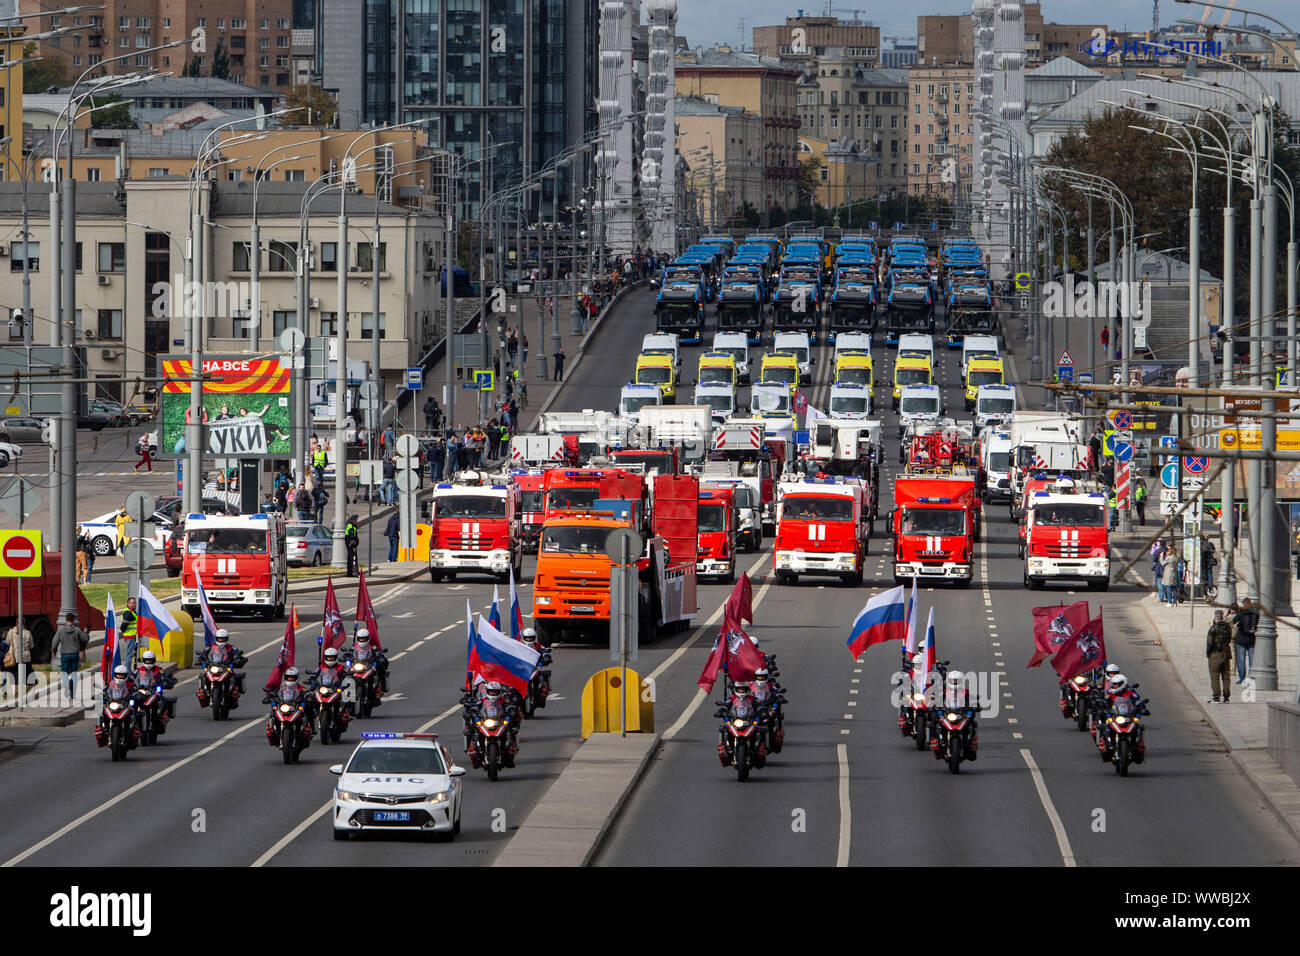 Moscow, Russia. 14th Sep, 2019. Municipal service vehicles take part in a parade in central Moscow, Russia, on Sept. 14, 2019. About 700 vehicles took part in the Municipal Service Vehicle Parade on Saturday. Credit: Alexander Zemlianichenko Jr/Xinhua Stock Photo